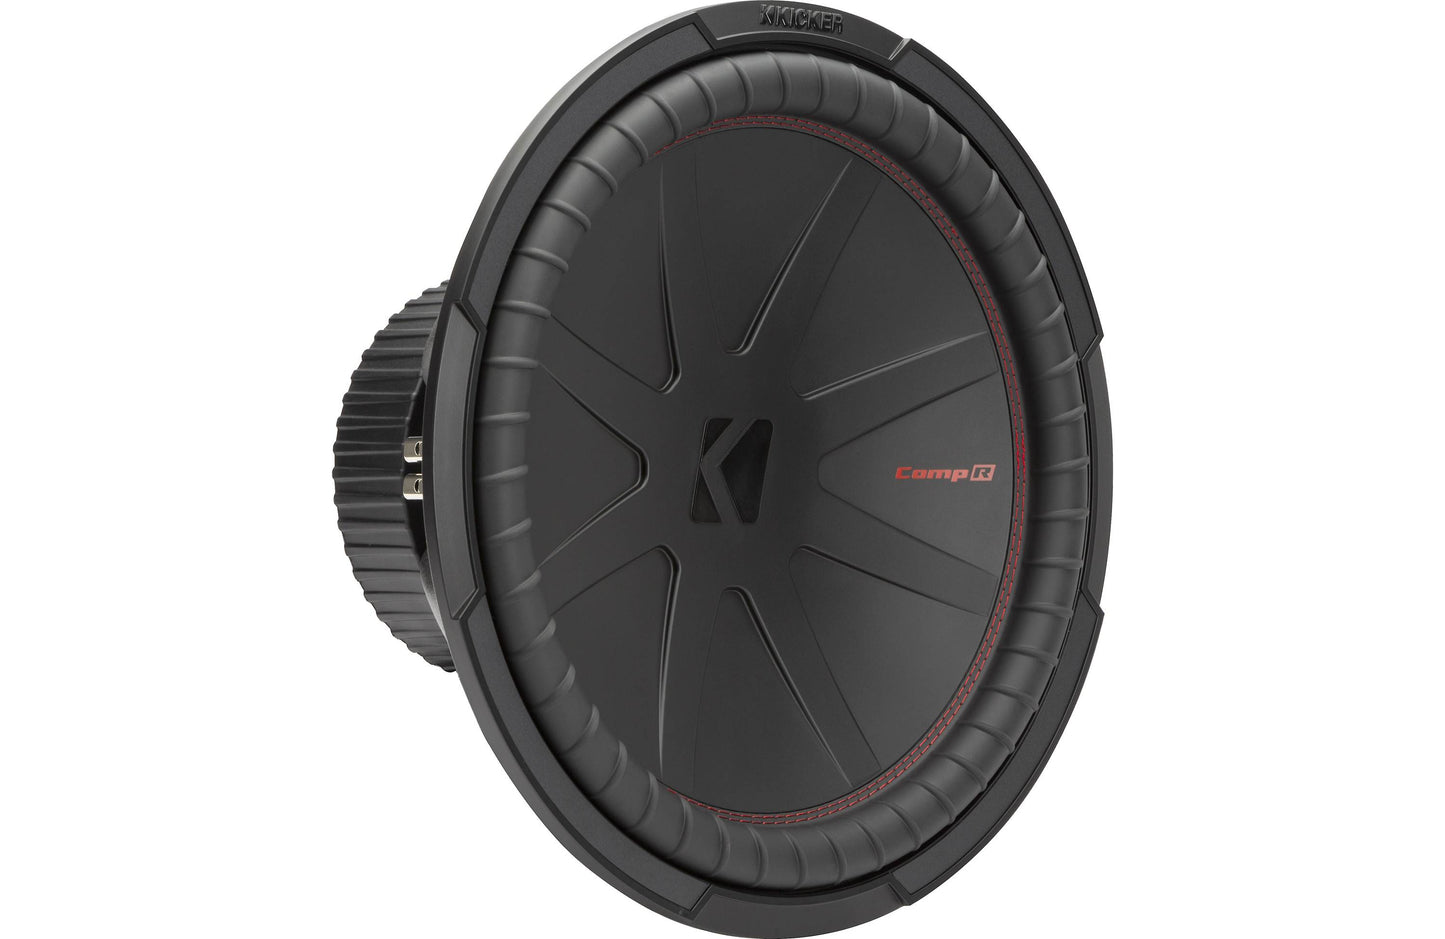 Kicker 48CWR154 CompR Series 15" subwoofer with dual 4-ohm voice coils